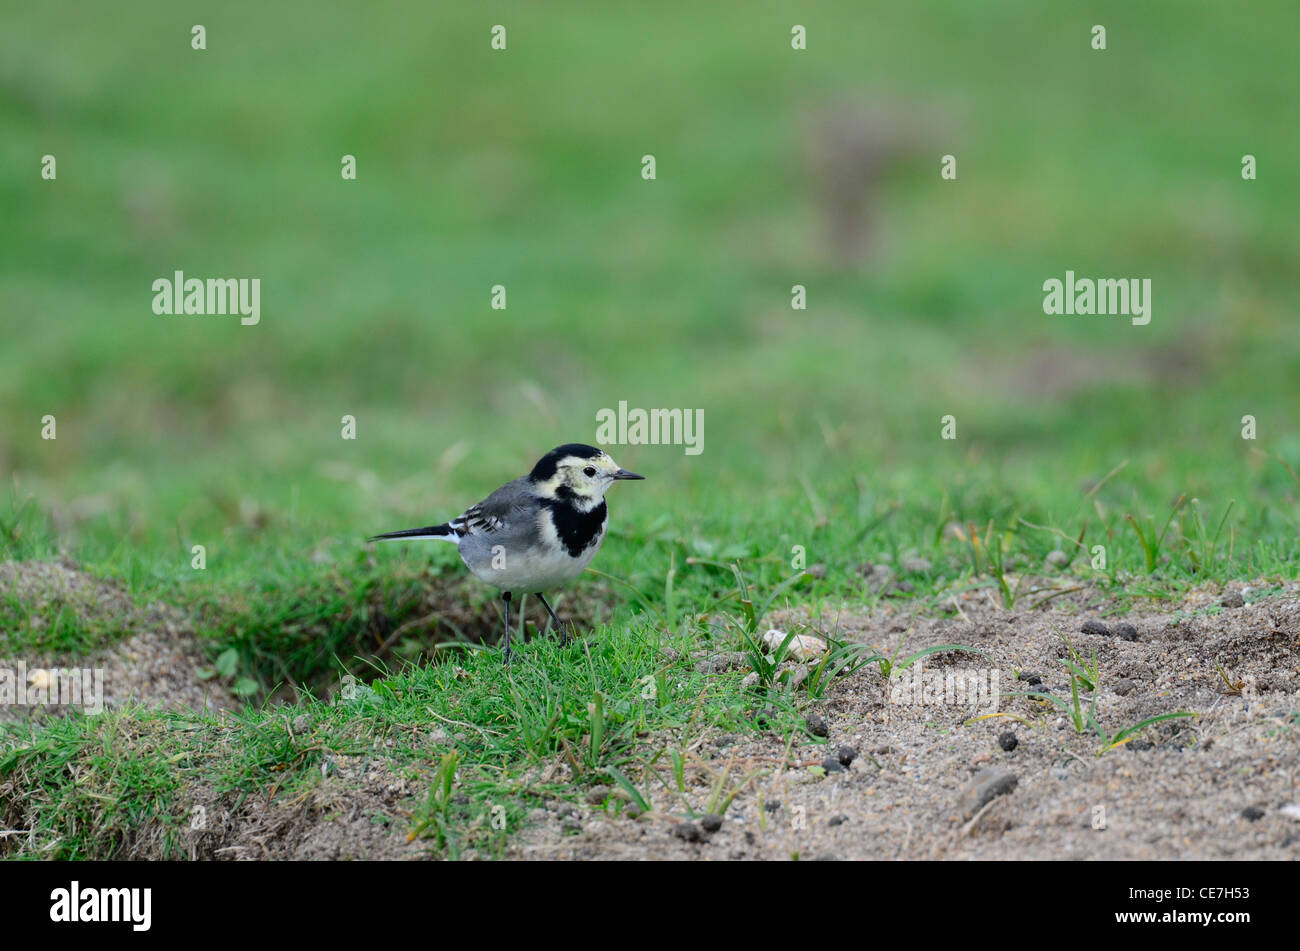 Pied wagtail on some grass Stock Photo